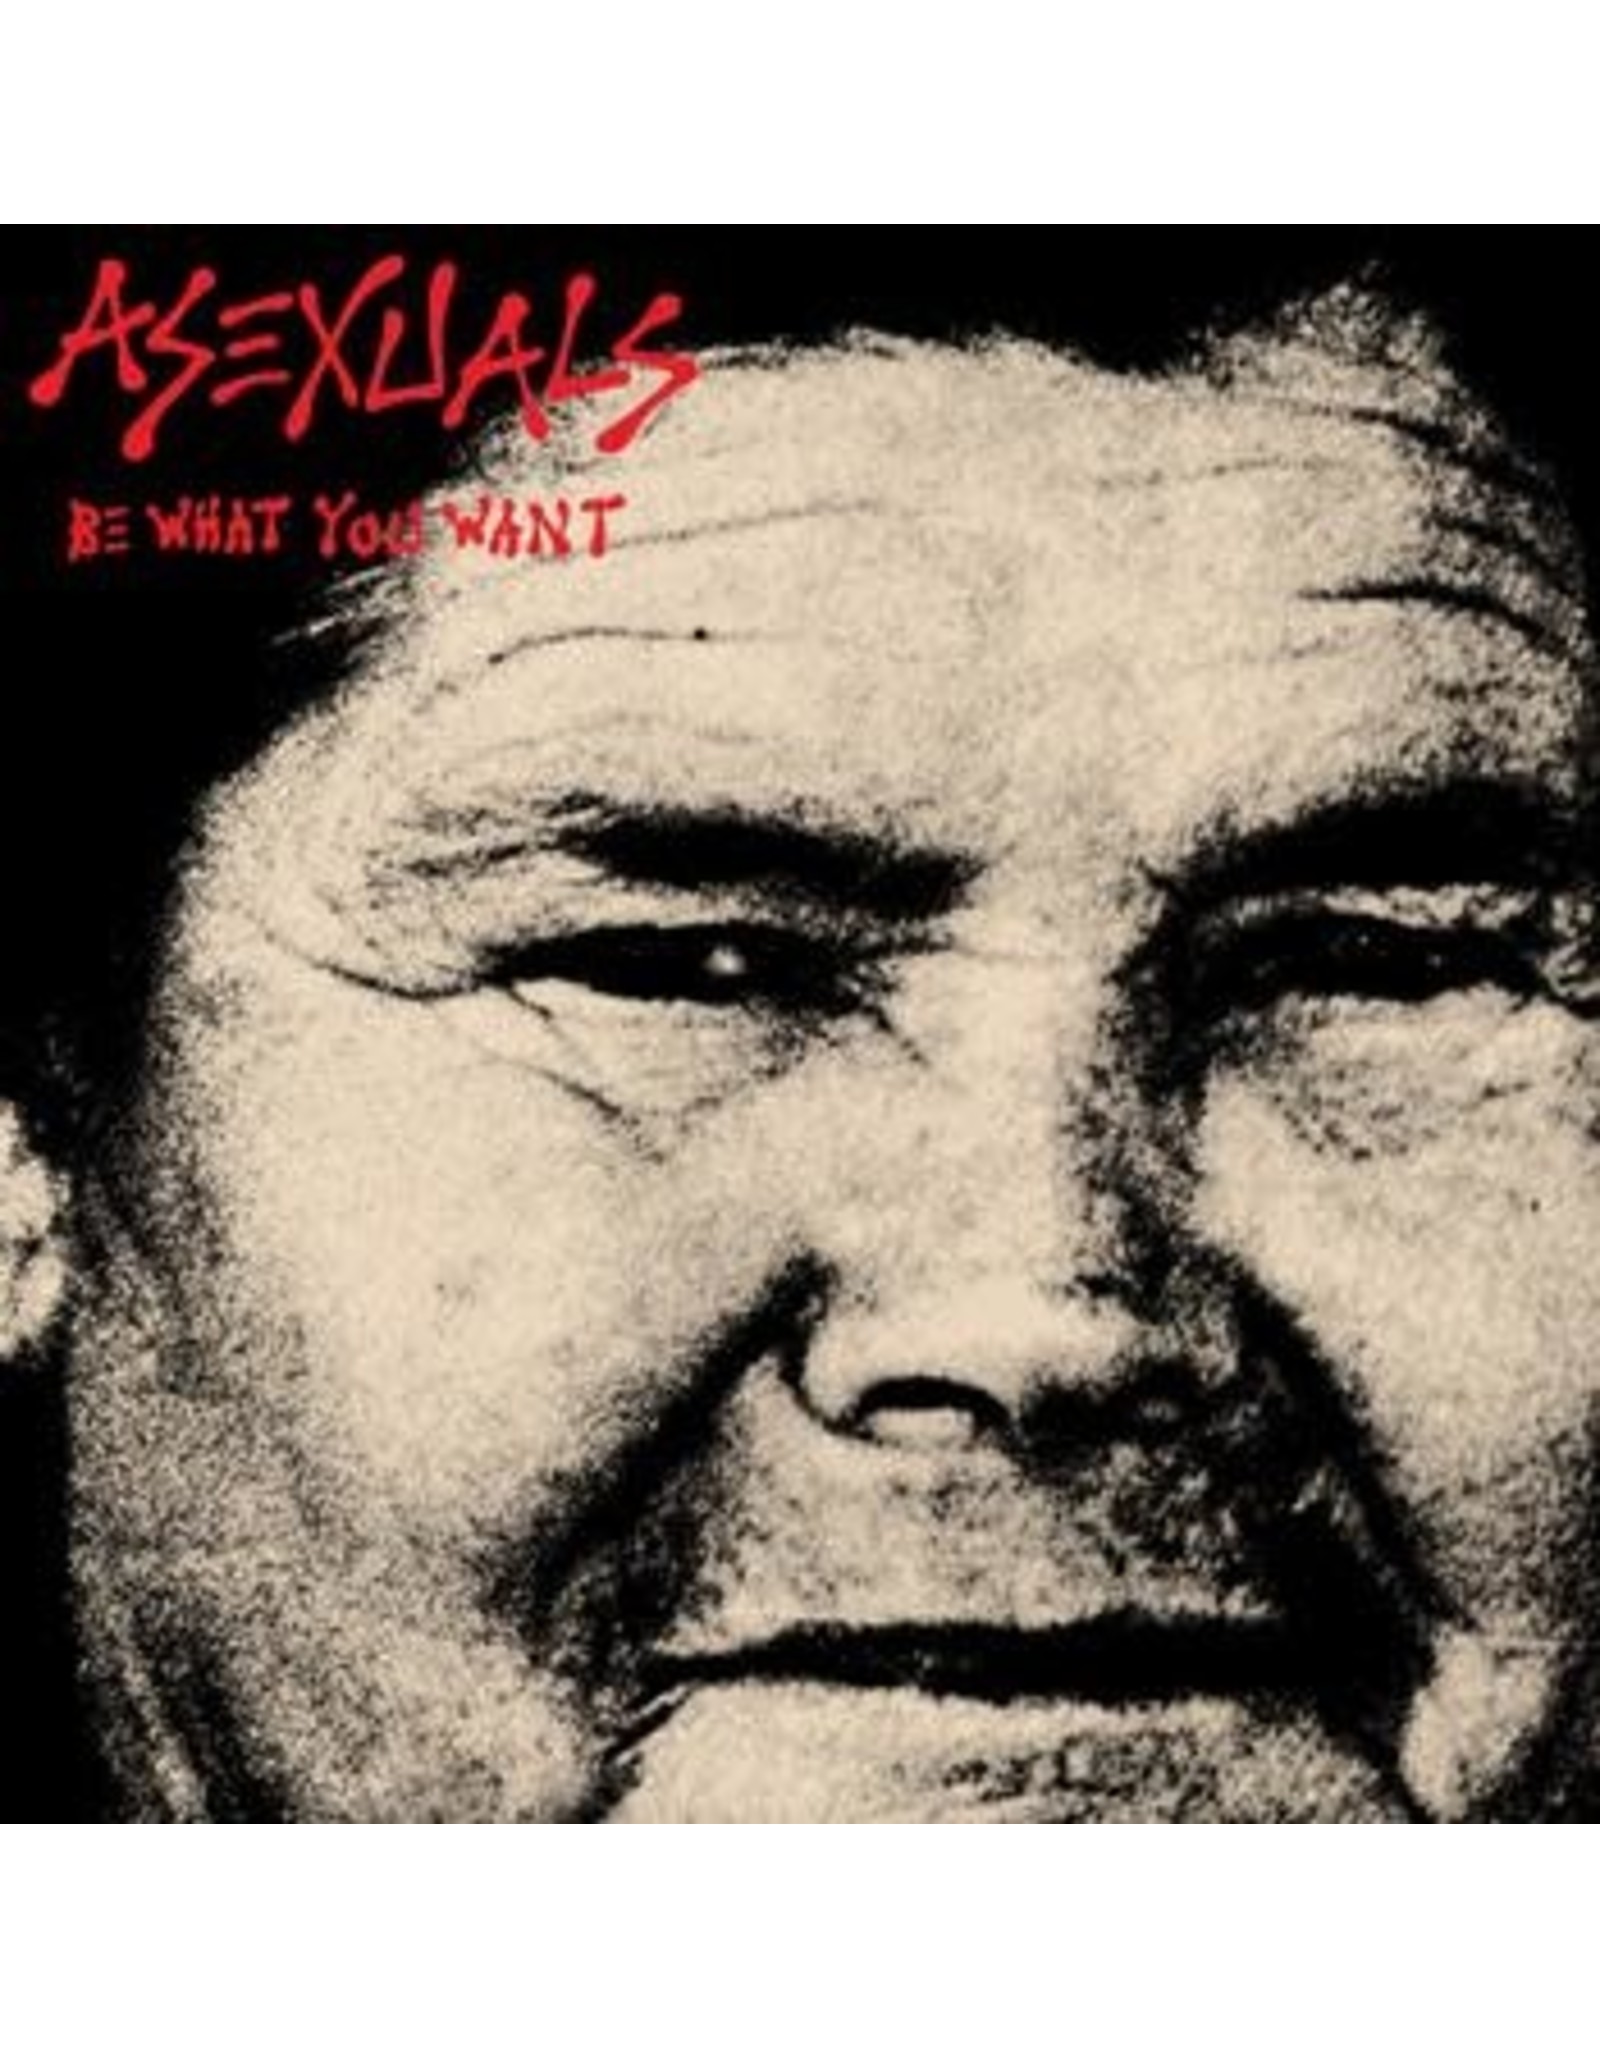 Return to Analog Asexuals: 2022RSD1 - Be What You Want (ltd color) LP